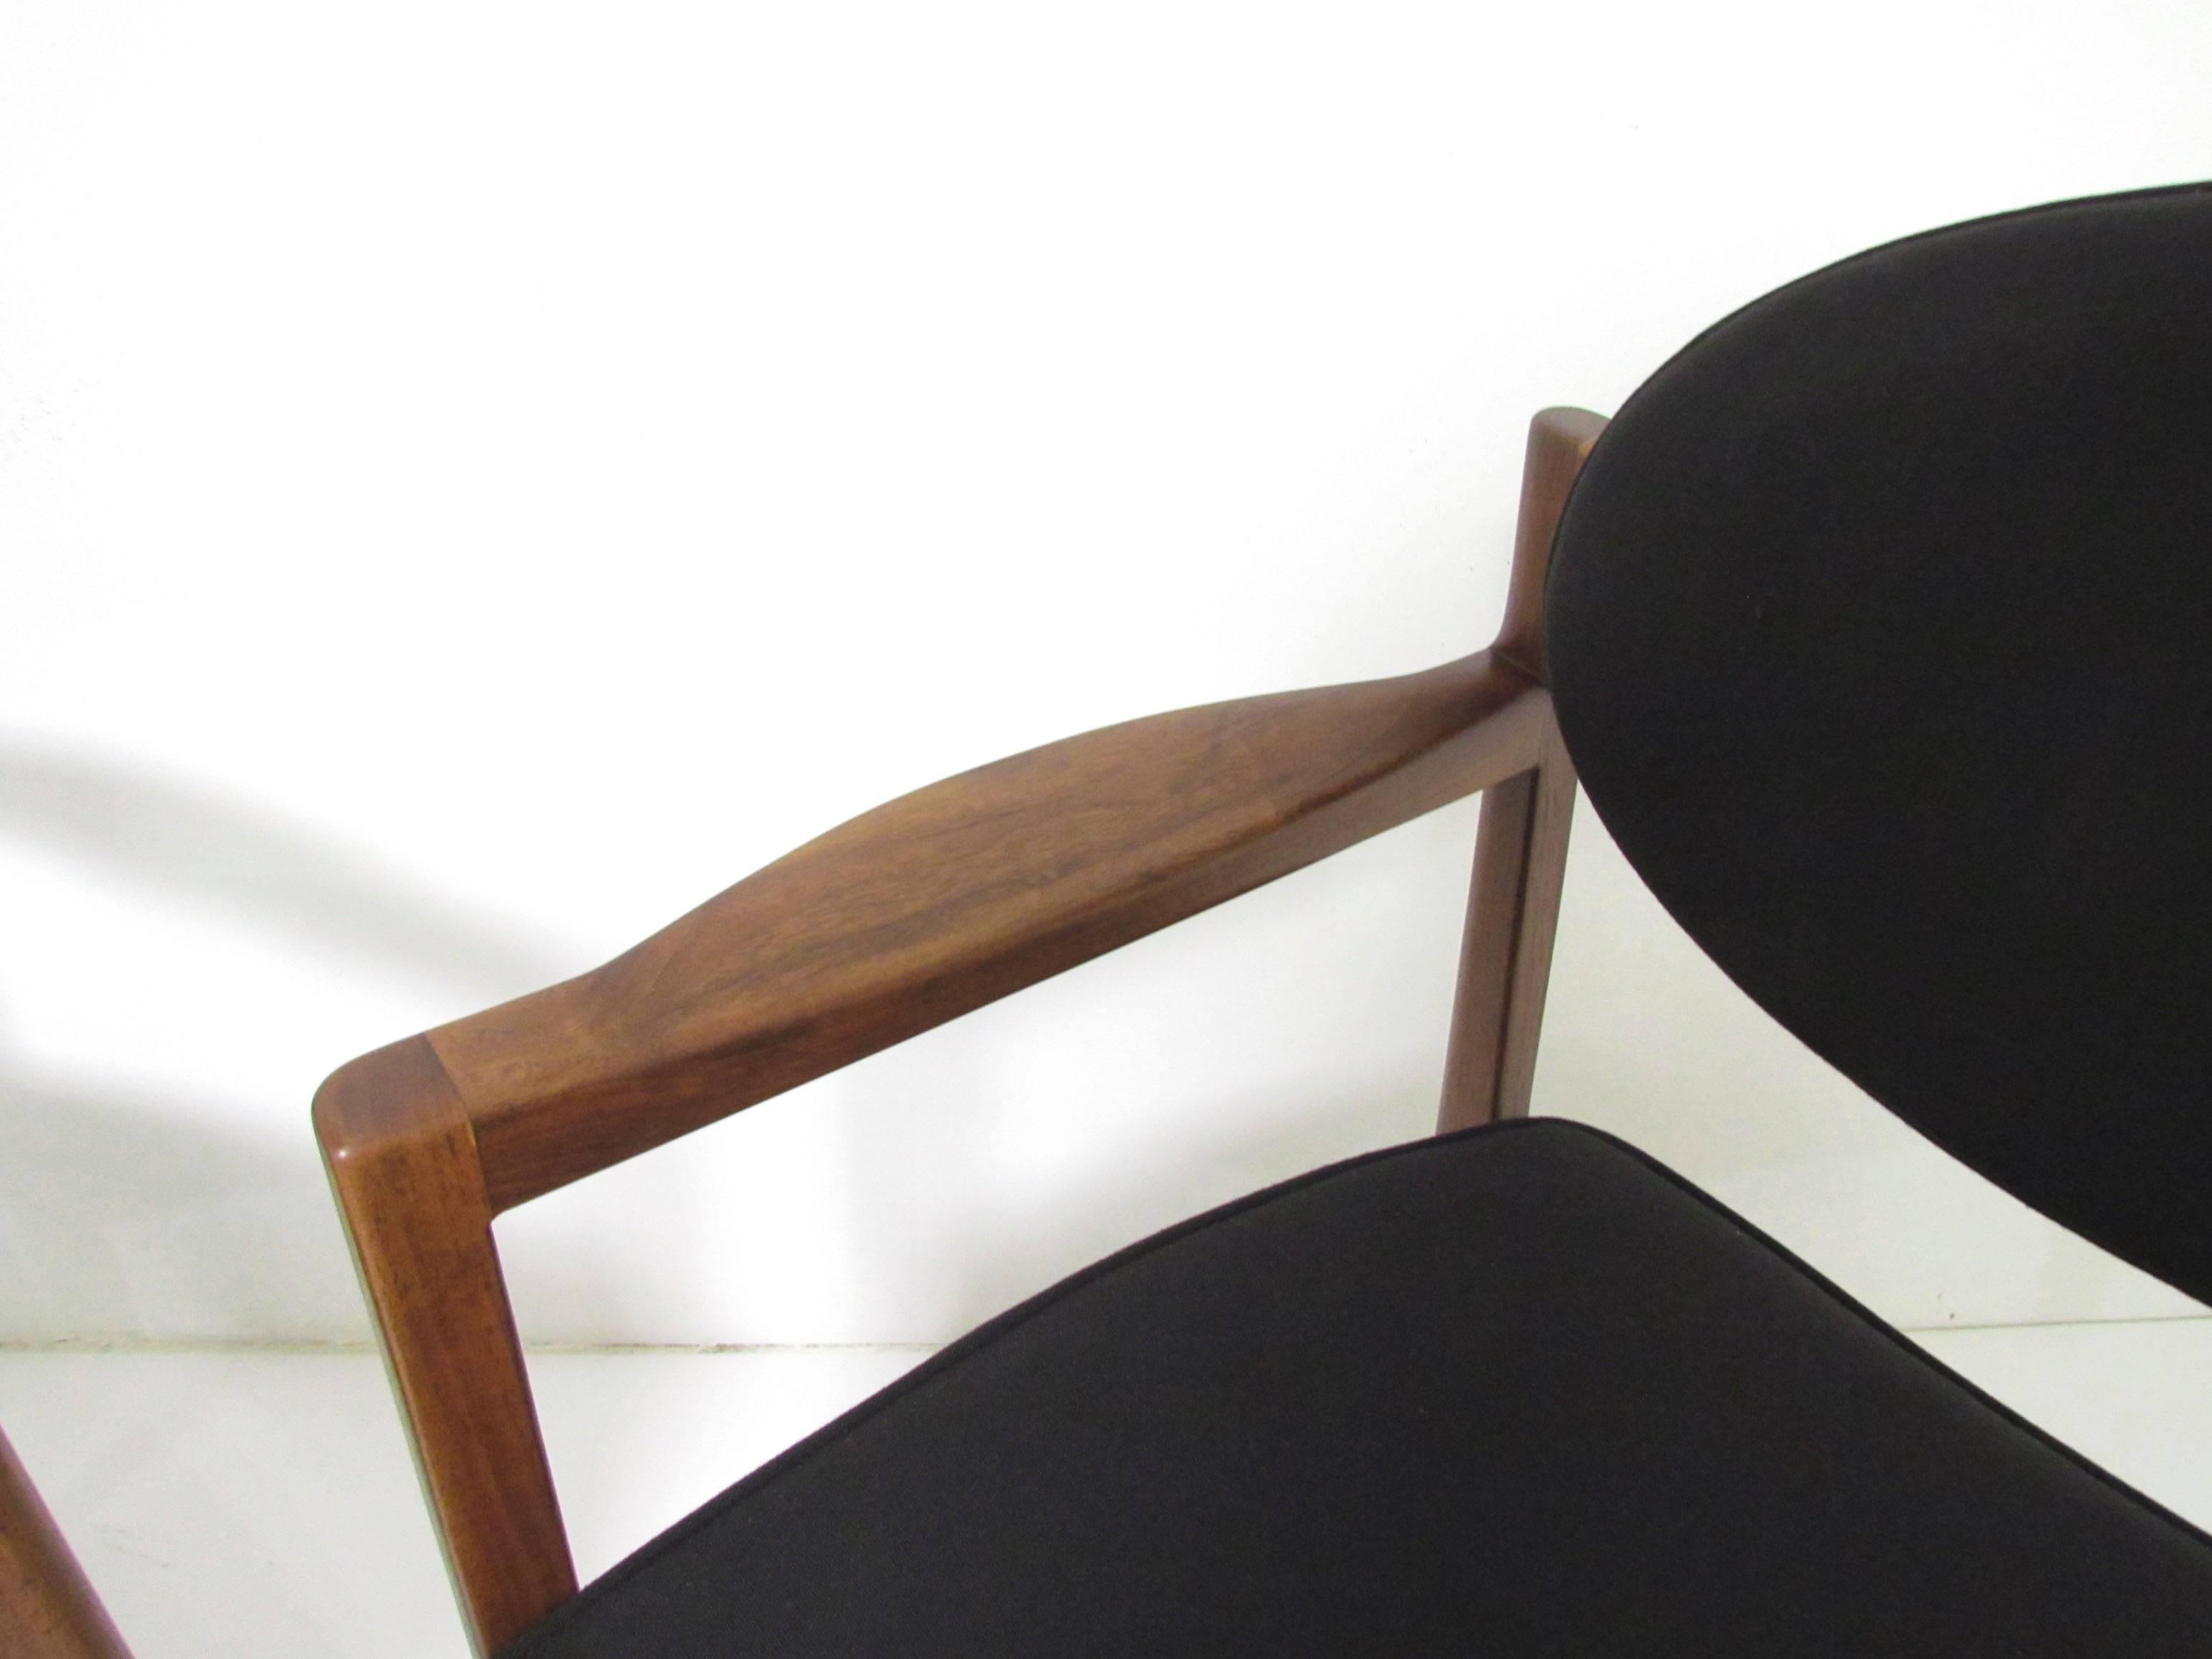 Upholstery Pair of Mid-Century Modern Armchairs by Jens Risom